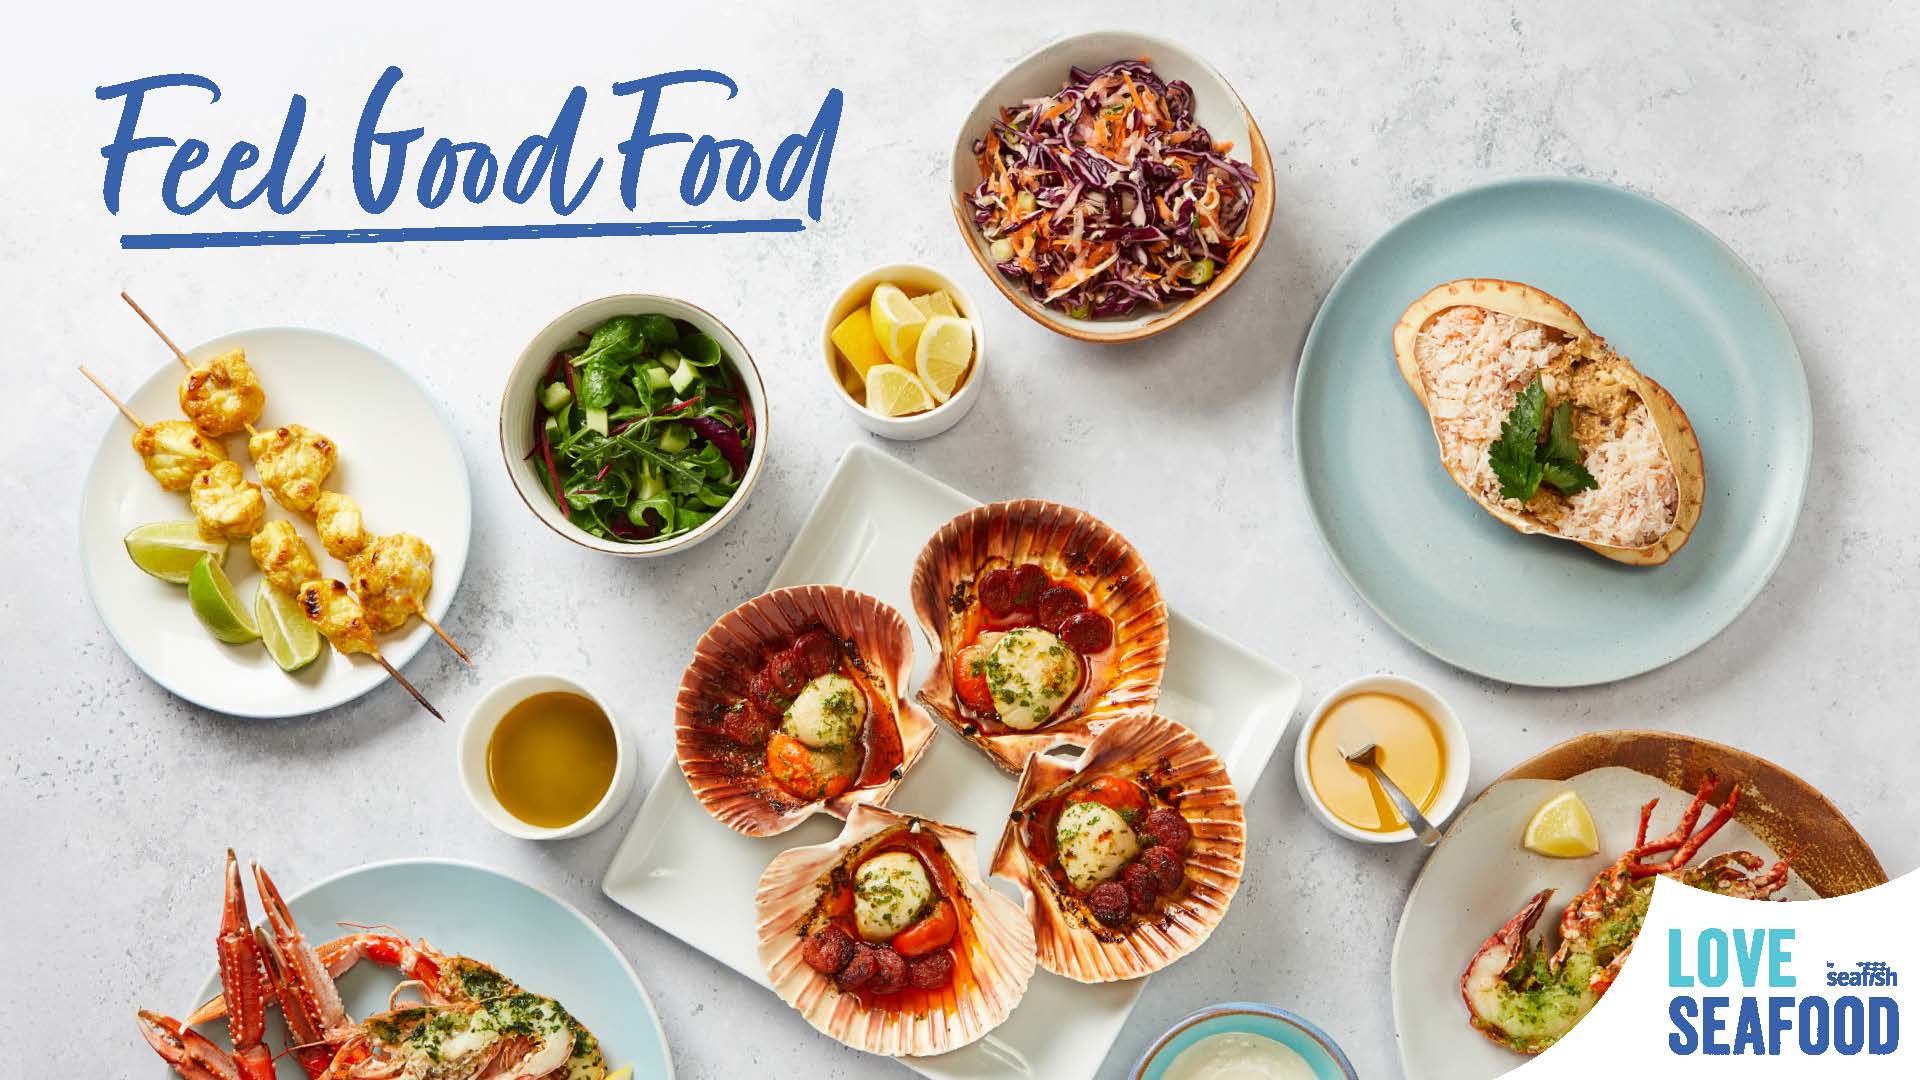 Social media graphic for spring 2021 Love Seafood campaign - text says Feel Good Food above photos of seafood dishes with scallops, lobster and crab